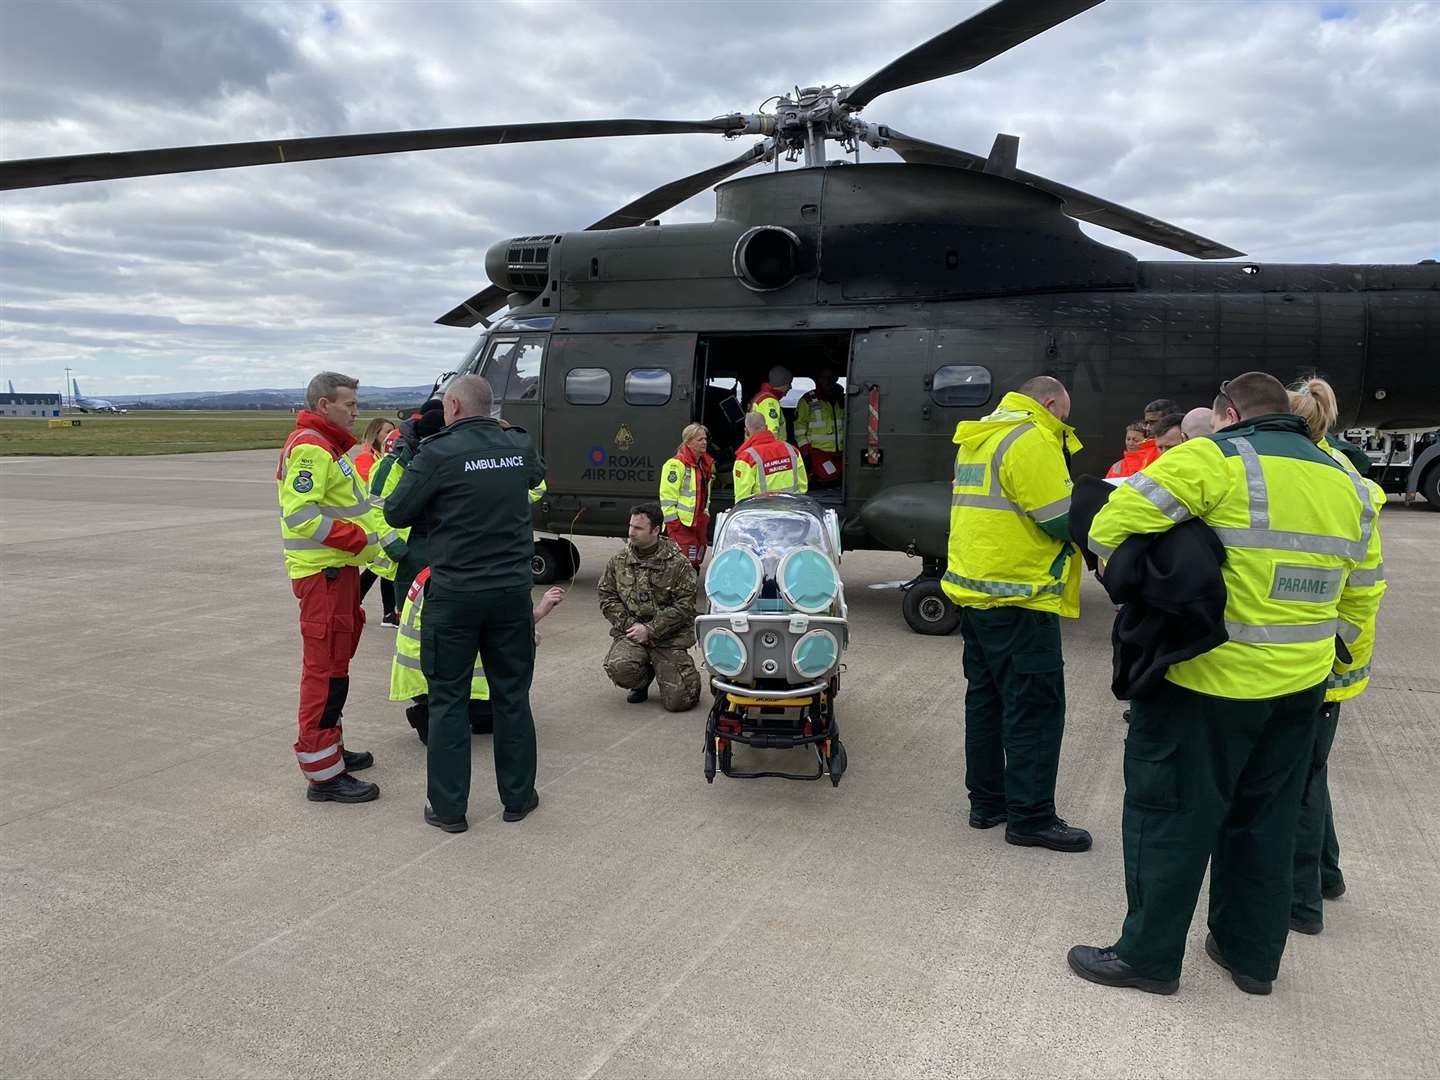 RAF Puma helicopter crews based at Kinloss Barracks supported the Scottish Ambulance Service with trials of the EpiShuttle medical isolation and transportation system as part of the Scottish Government’s coronavirus response.